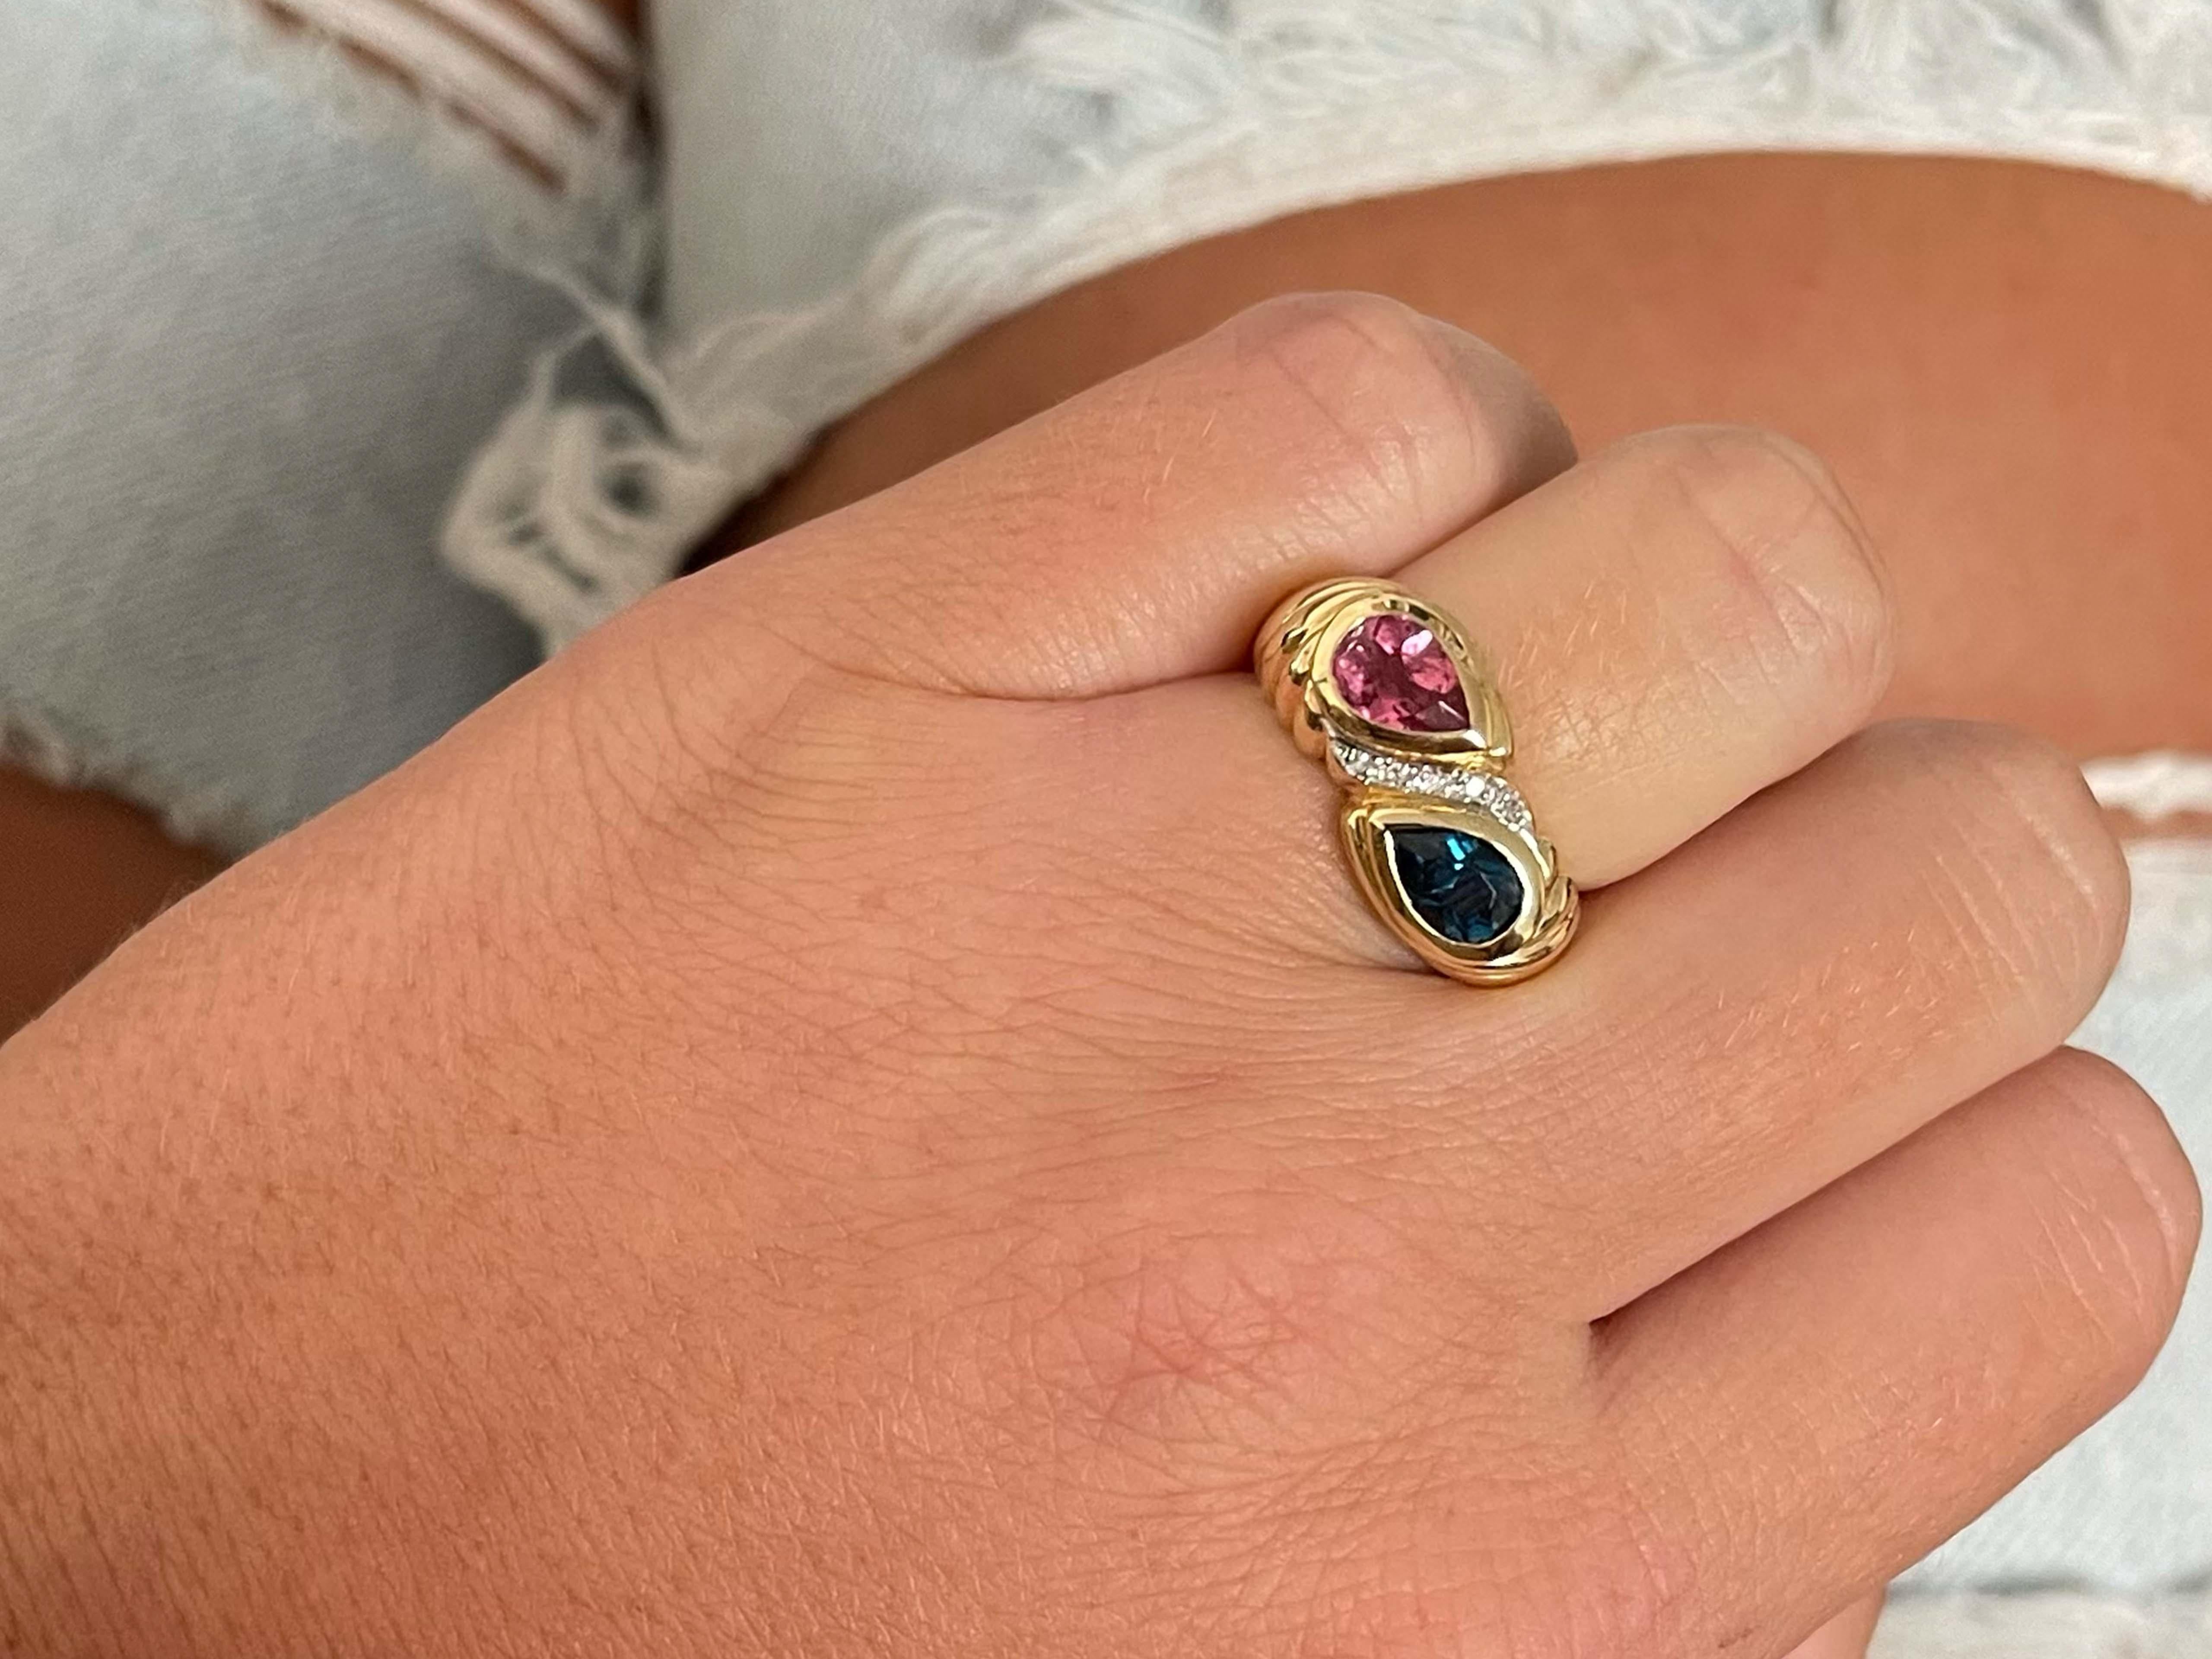 Item Specifications:

Metal: 14K Yellow Gold

Style: Statement Ring

Ring Size: 5.5 (resizing available for a fee)

Total Weight: 6.1 Grams
​
​Diamond Carat Weight: ~0.05 carats

Gemstone Specifications:

Gemstones: 1 pink and 1 indicolite